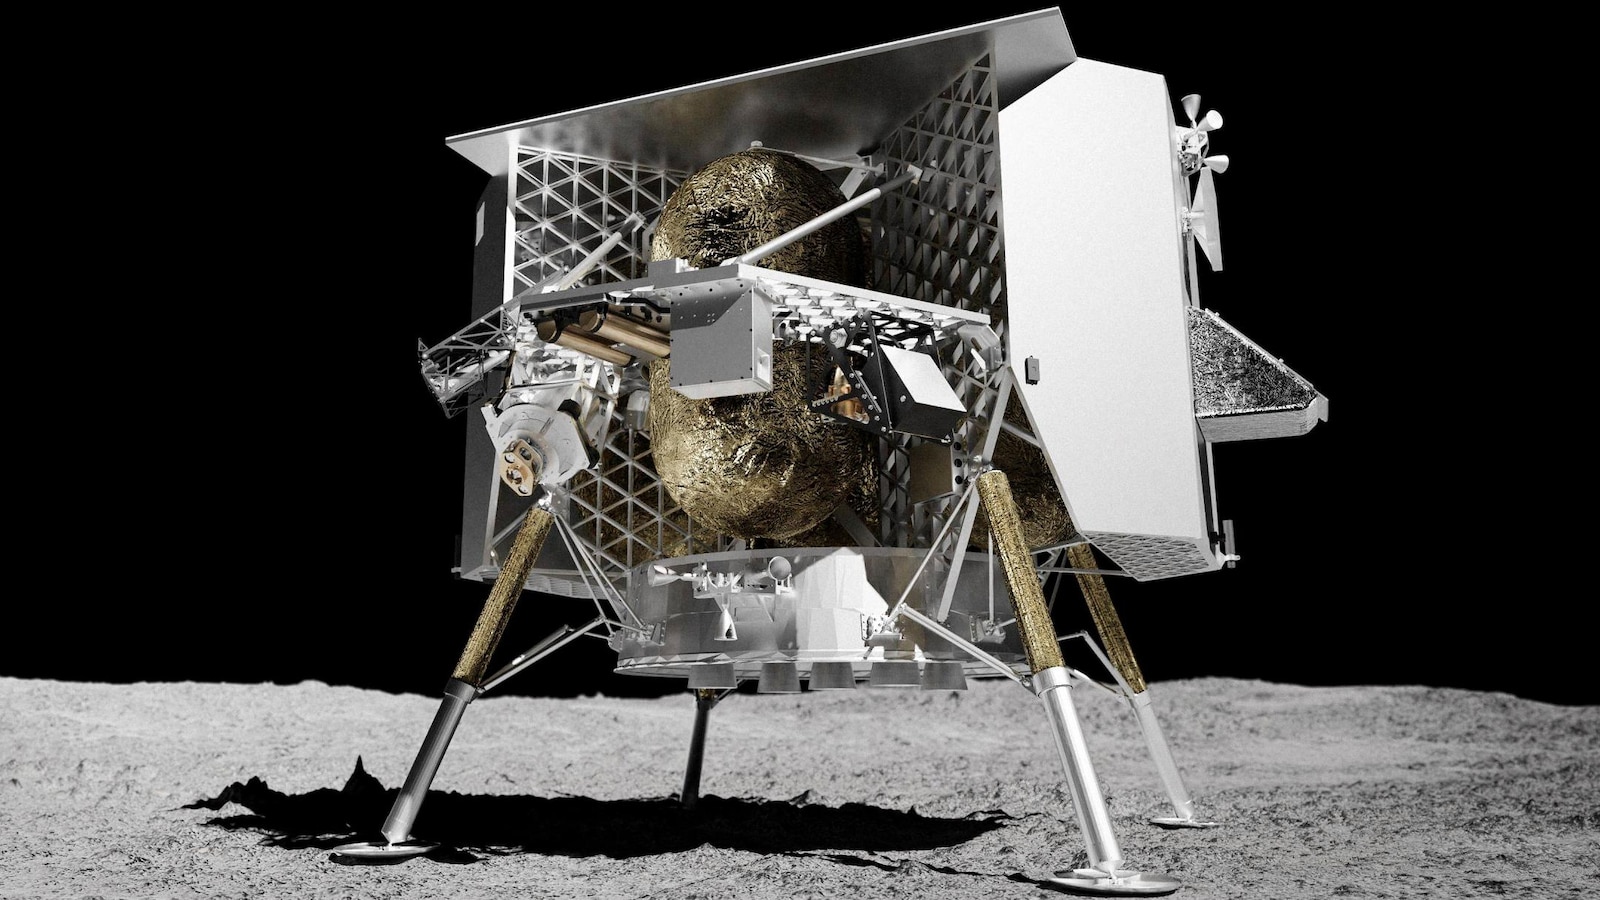 Private US lander destroyed during reentry following unsuccessful moon mission, confirms company